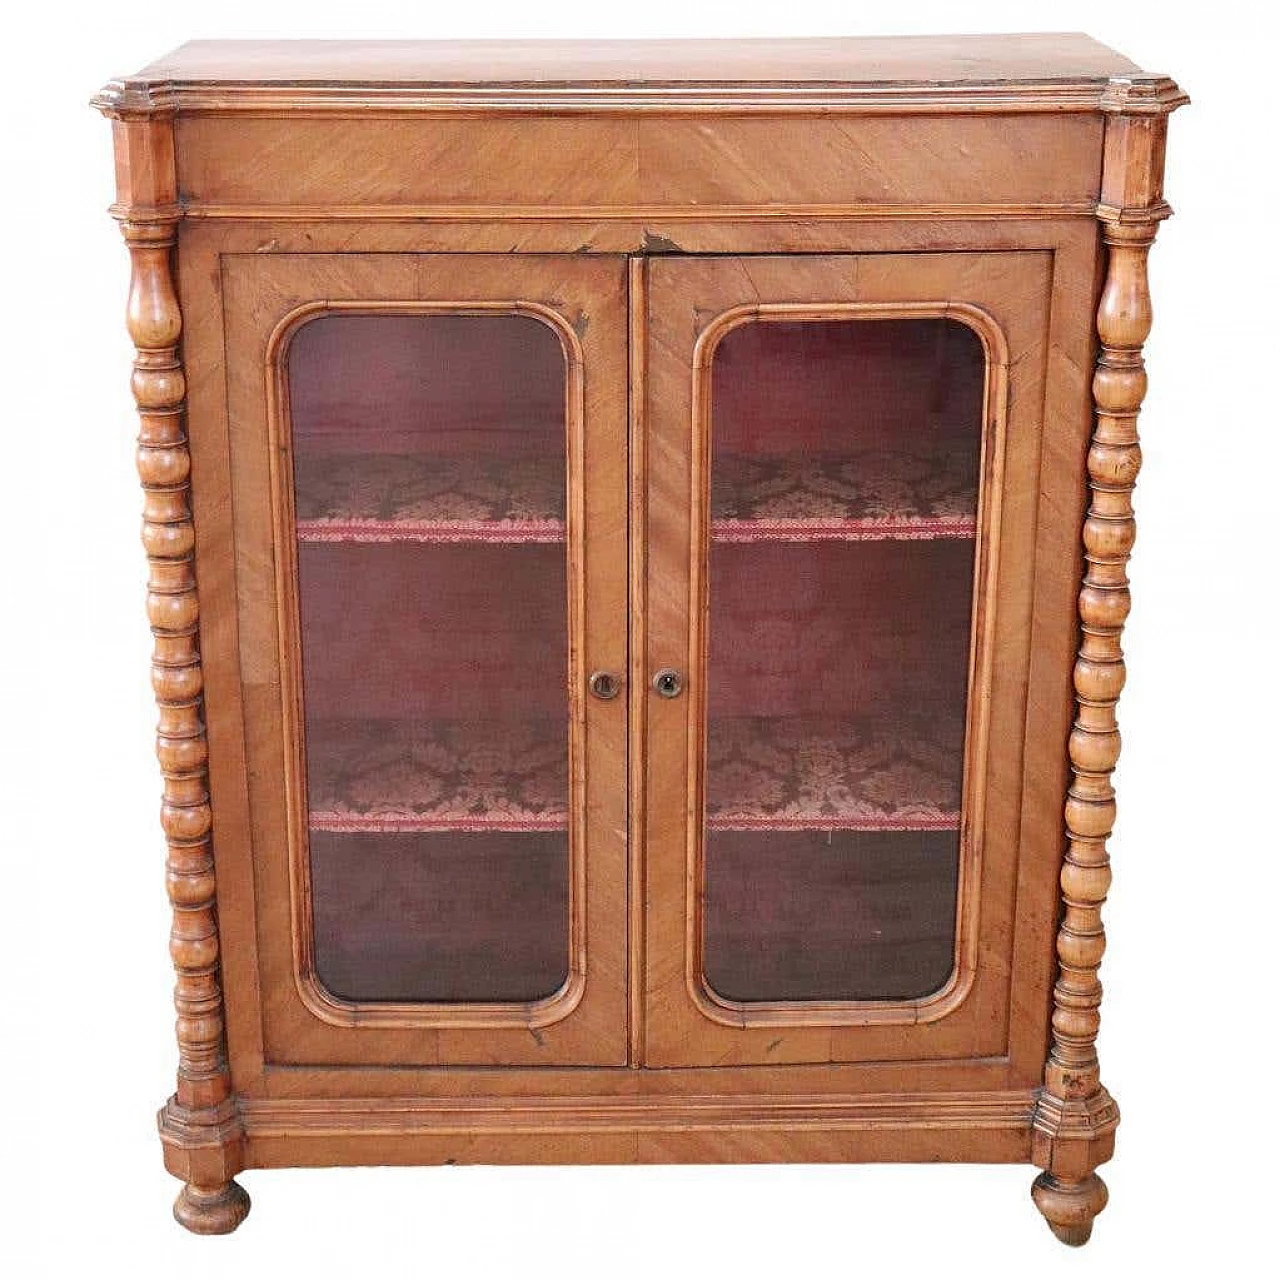 Louis Philippe style walnut display case with damask interior, 19th century 1455767